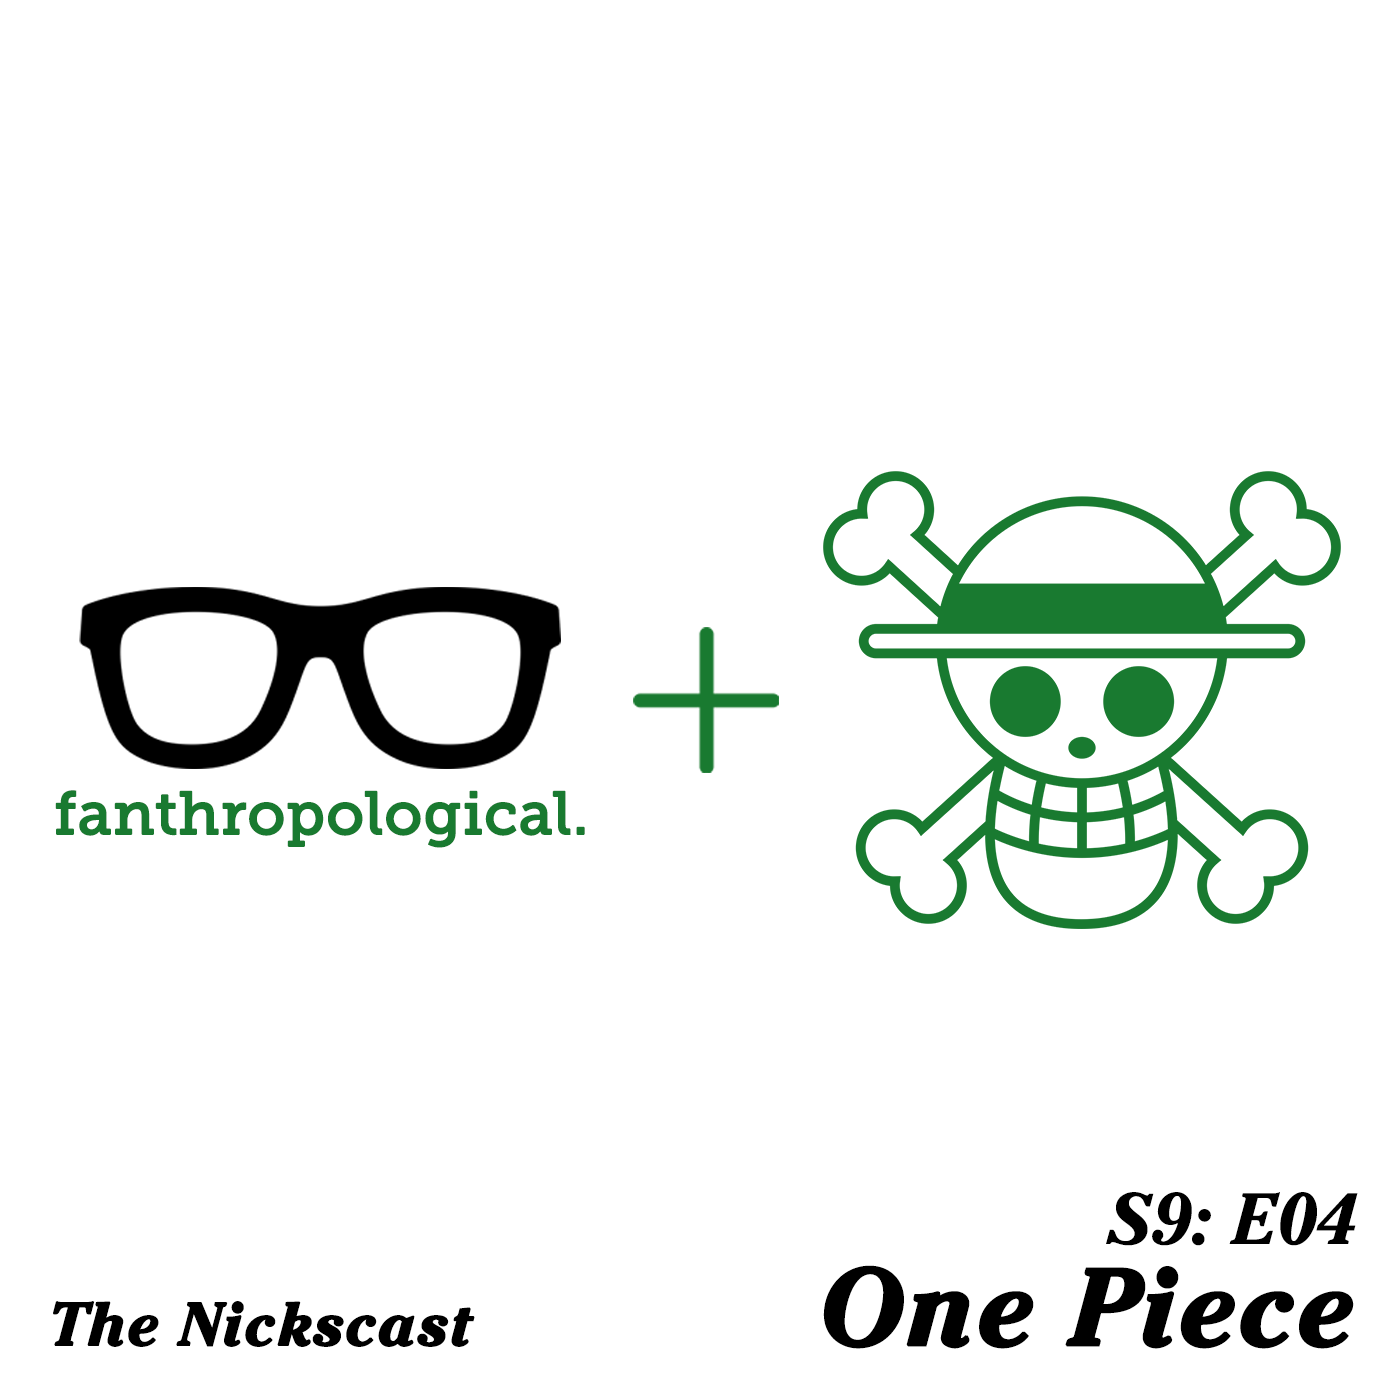 One Piece - Friendship, Adventure, and... Piracy?